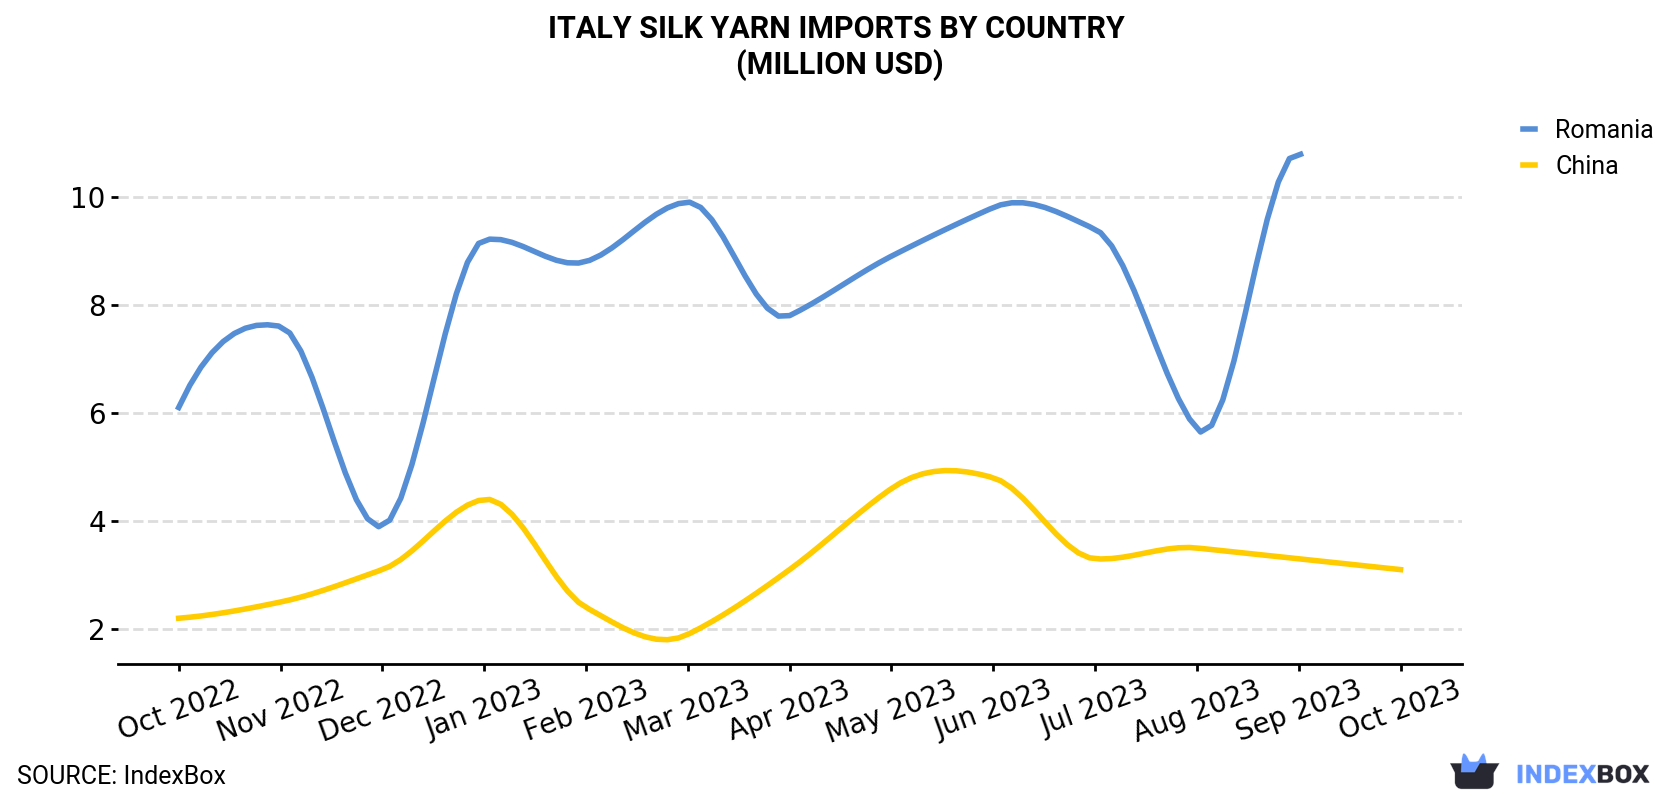 Italy Silk Yarn Imports By Country (Million USD)